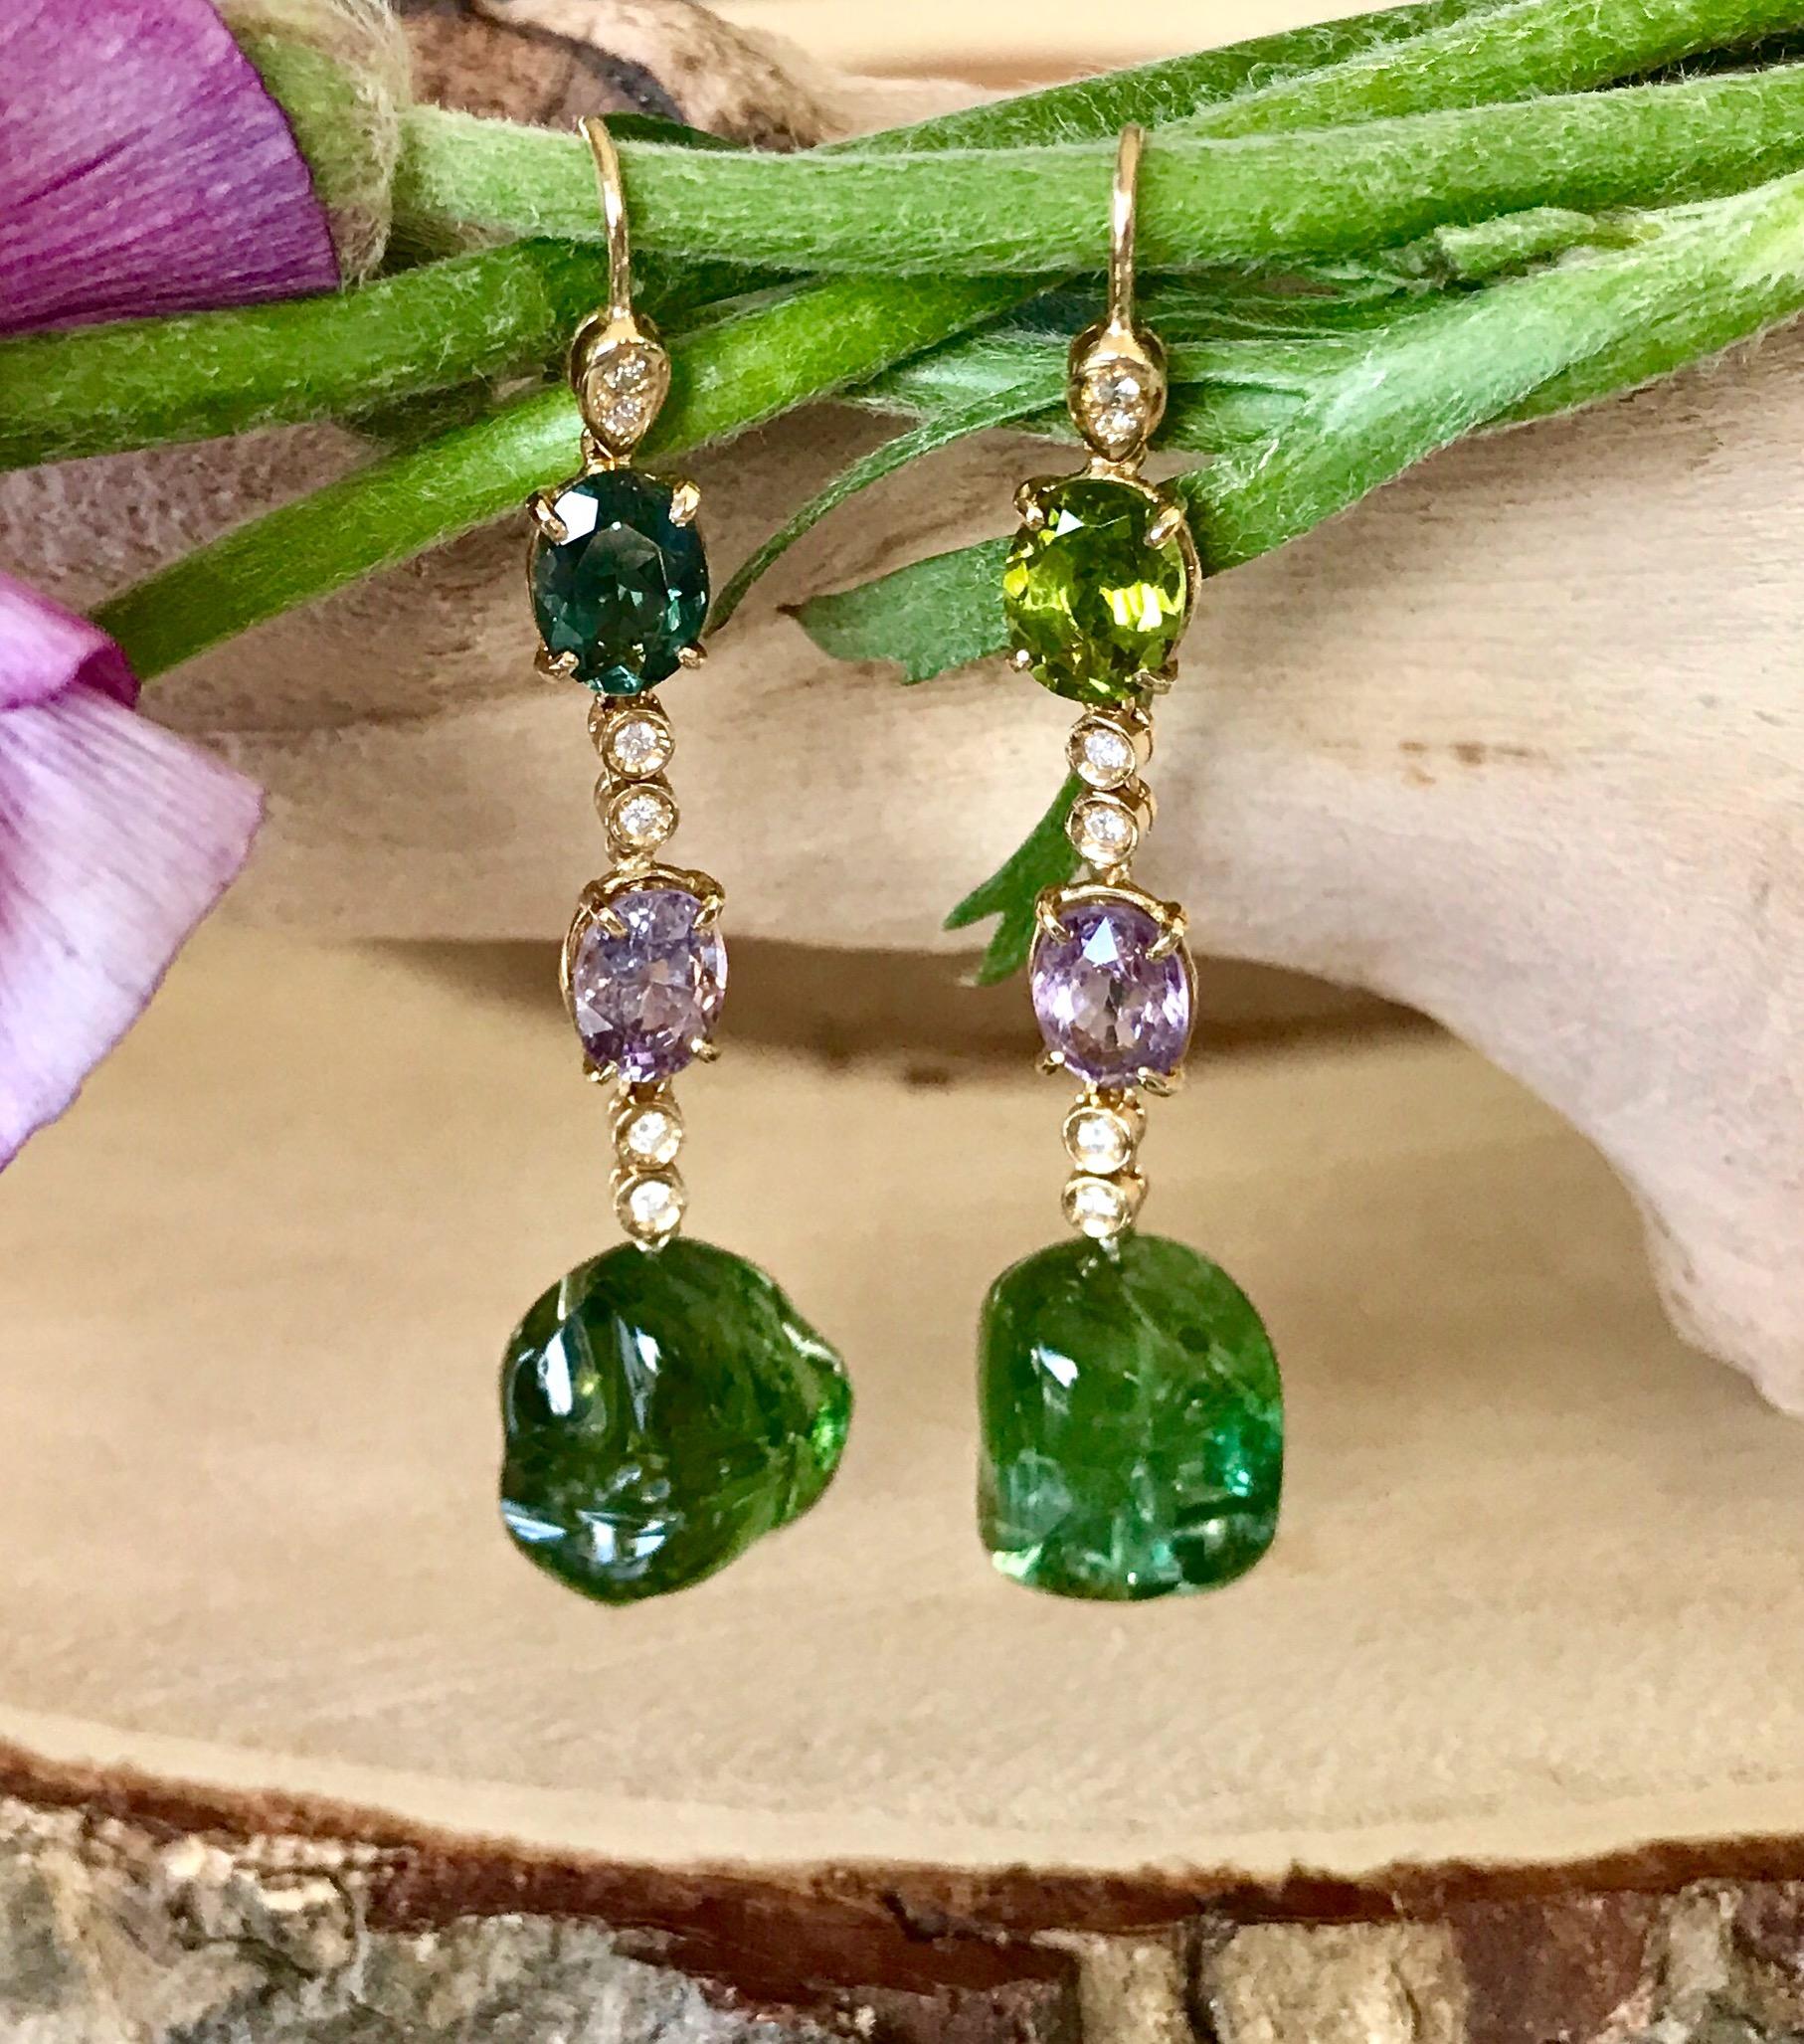 Joon Han one-of-a-kind drop earrings of green tourmaline nuggets, faceted spinels and tourmalines, and white diamonds, handcrafted in 18K yellow gold. These exquisite dangle earrings sway gently as you move, and are a refreshing pop of vibrant